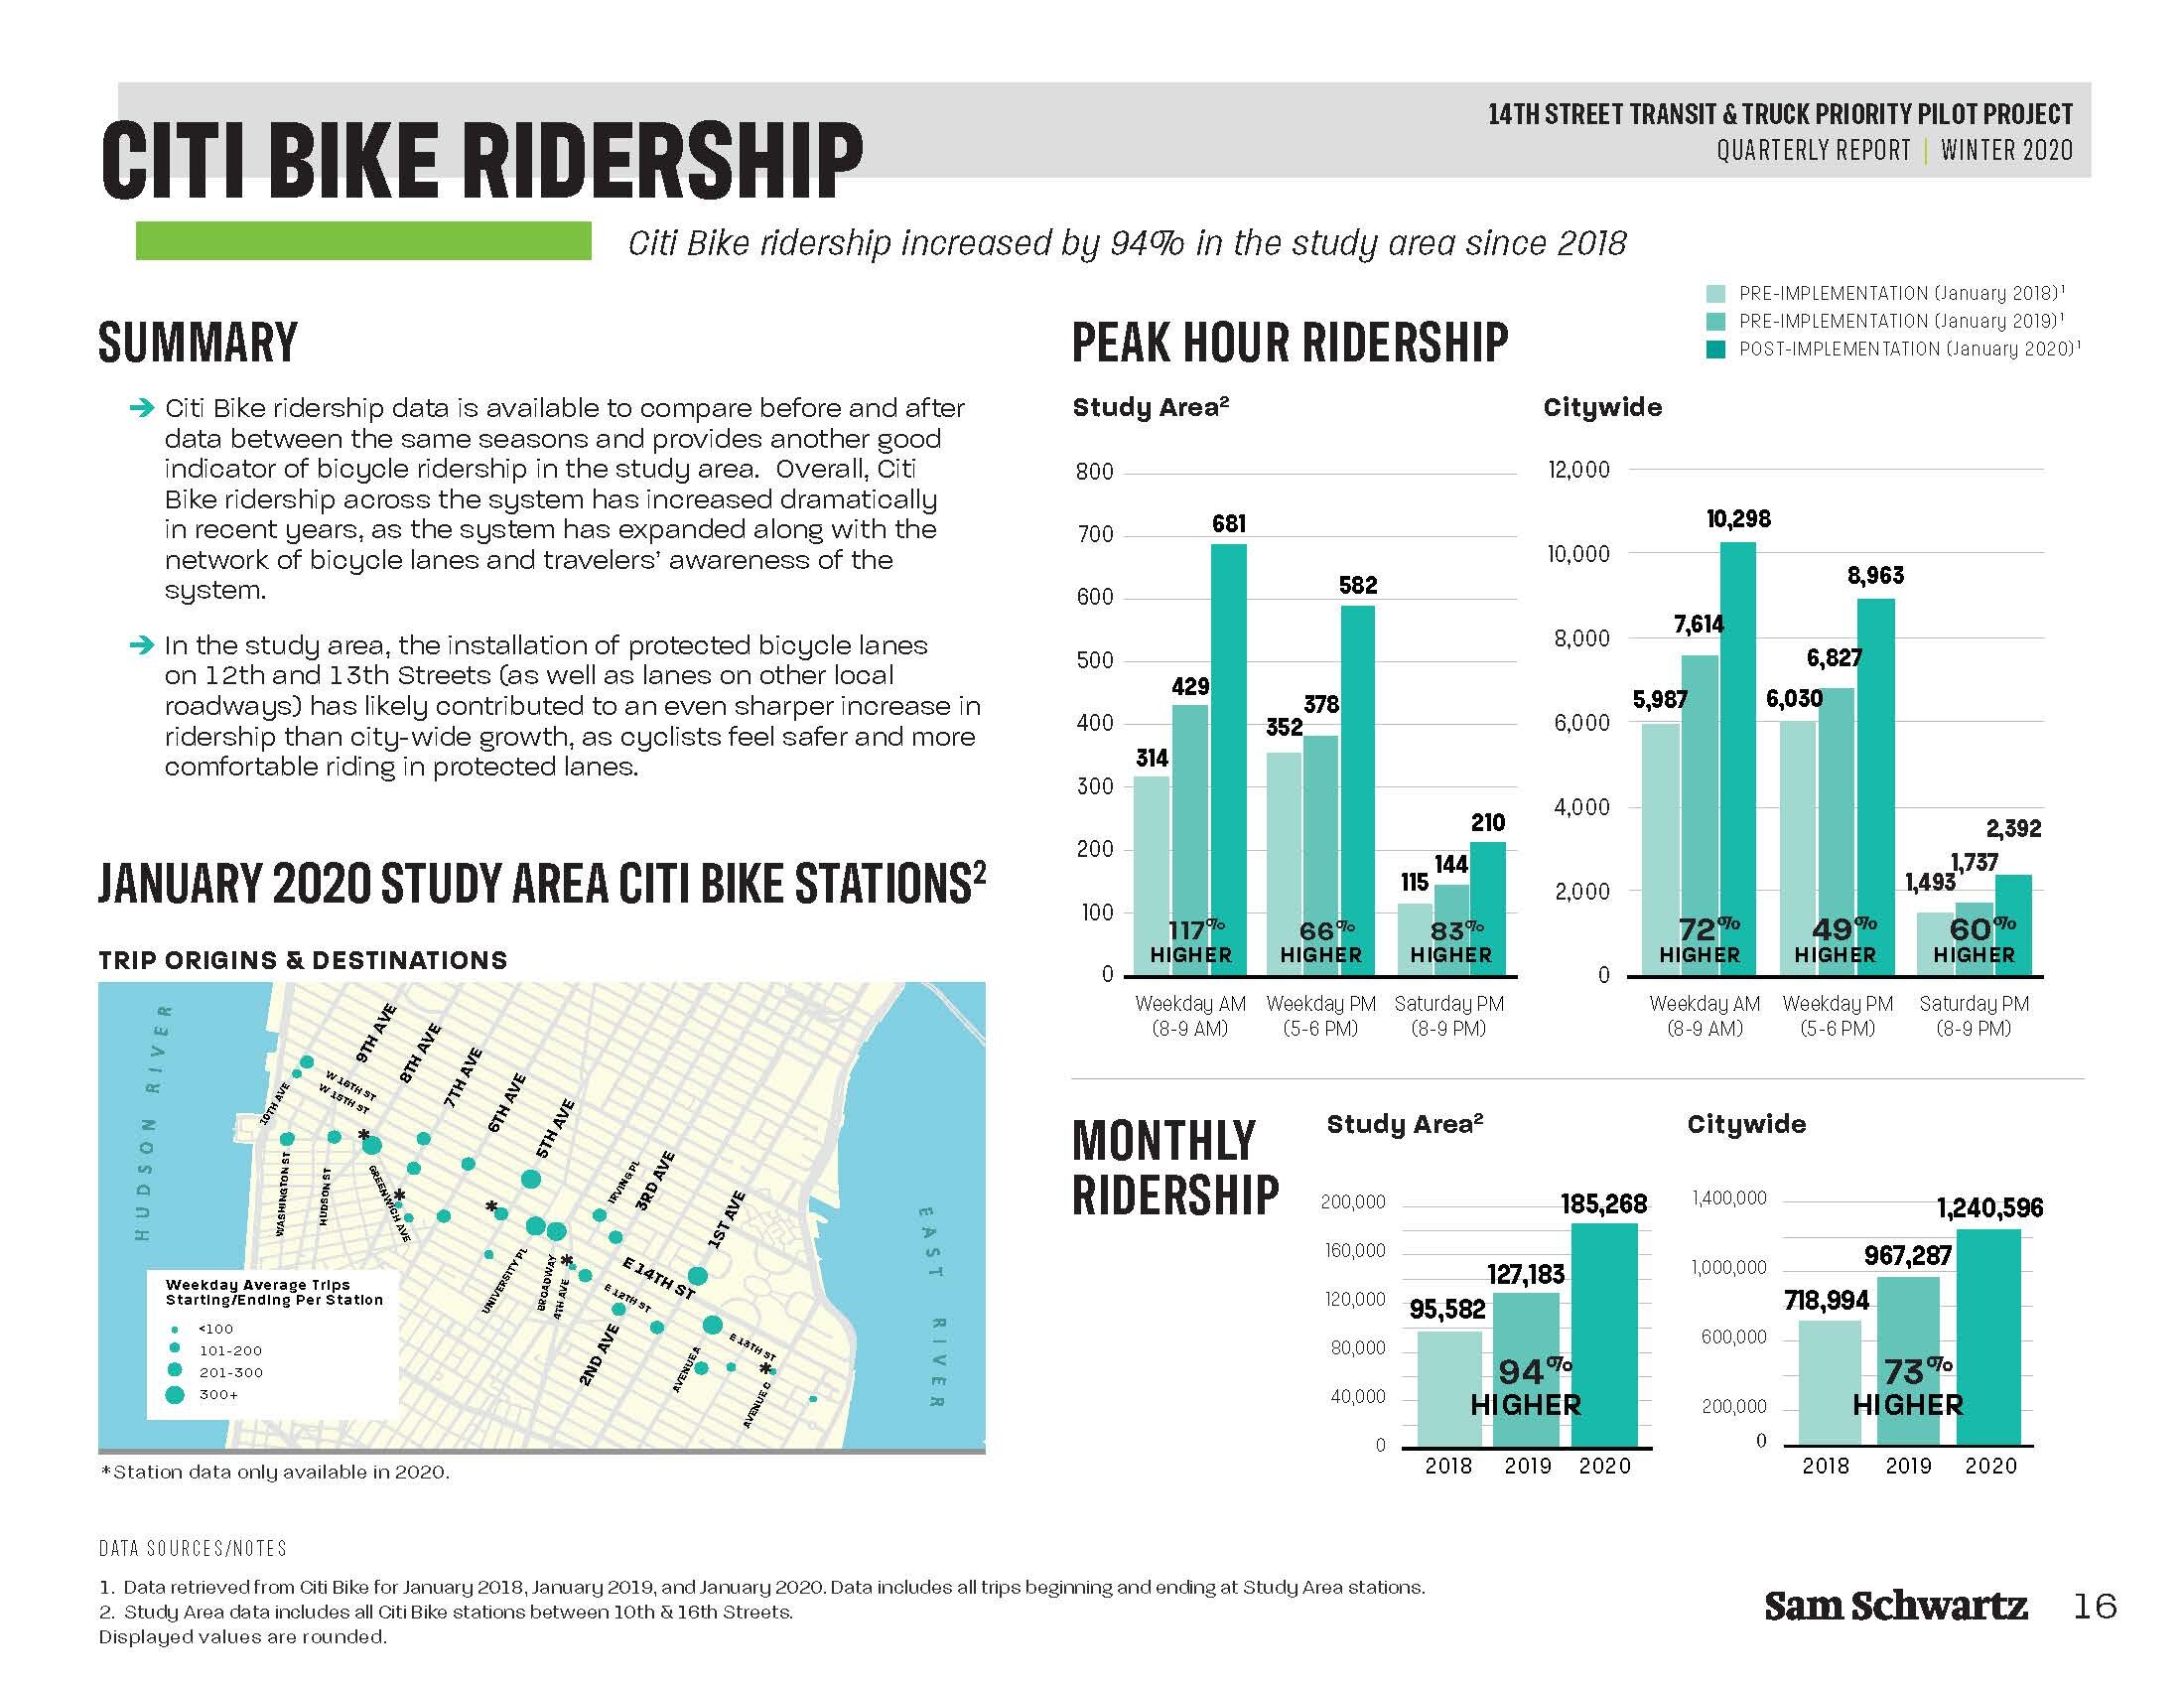 citibike Pages from 14 Street Report 2 Winter 2020-3.jpg